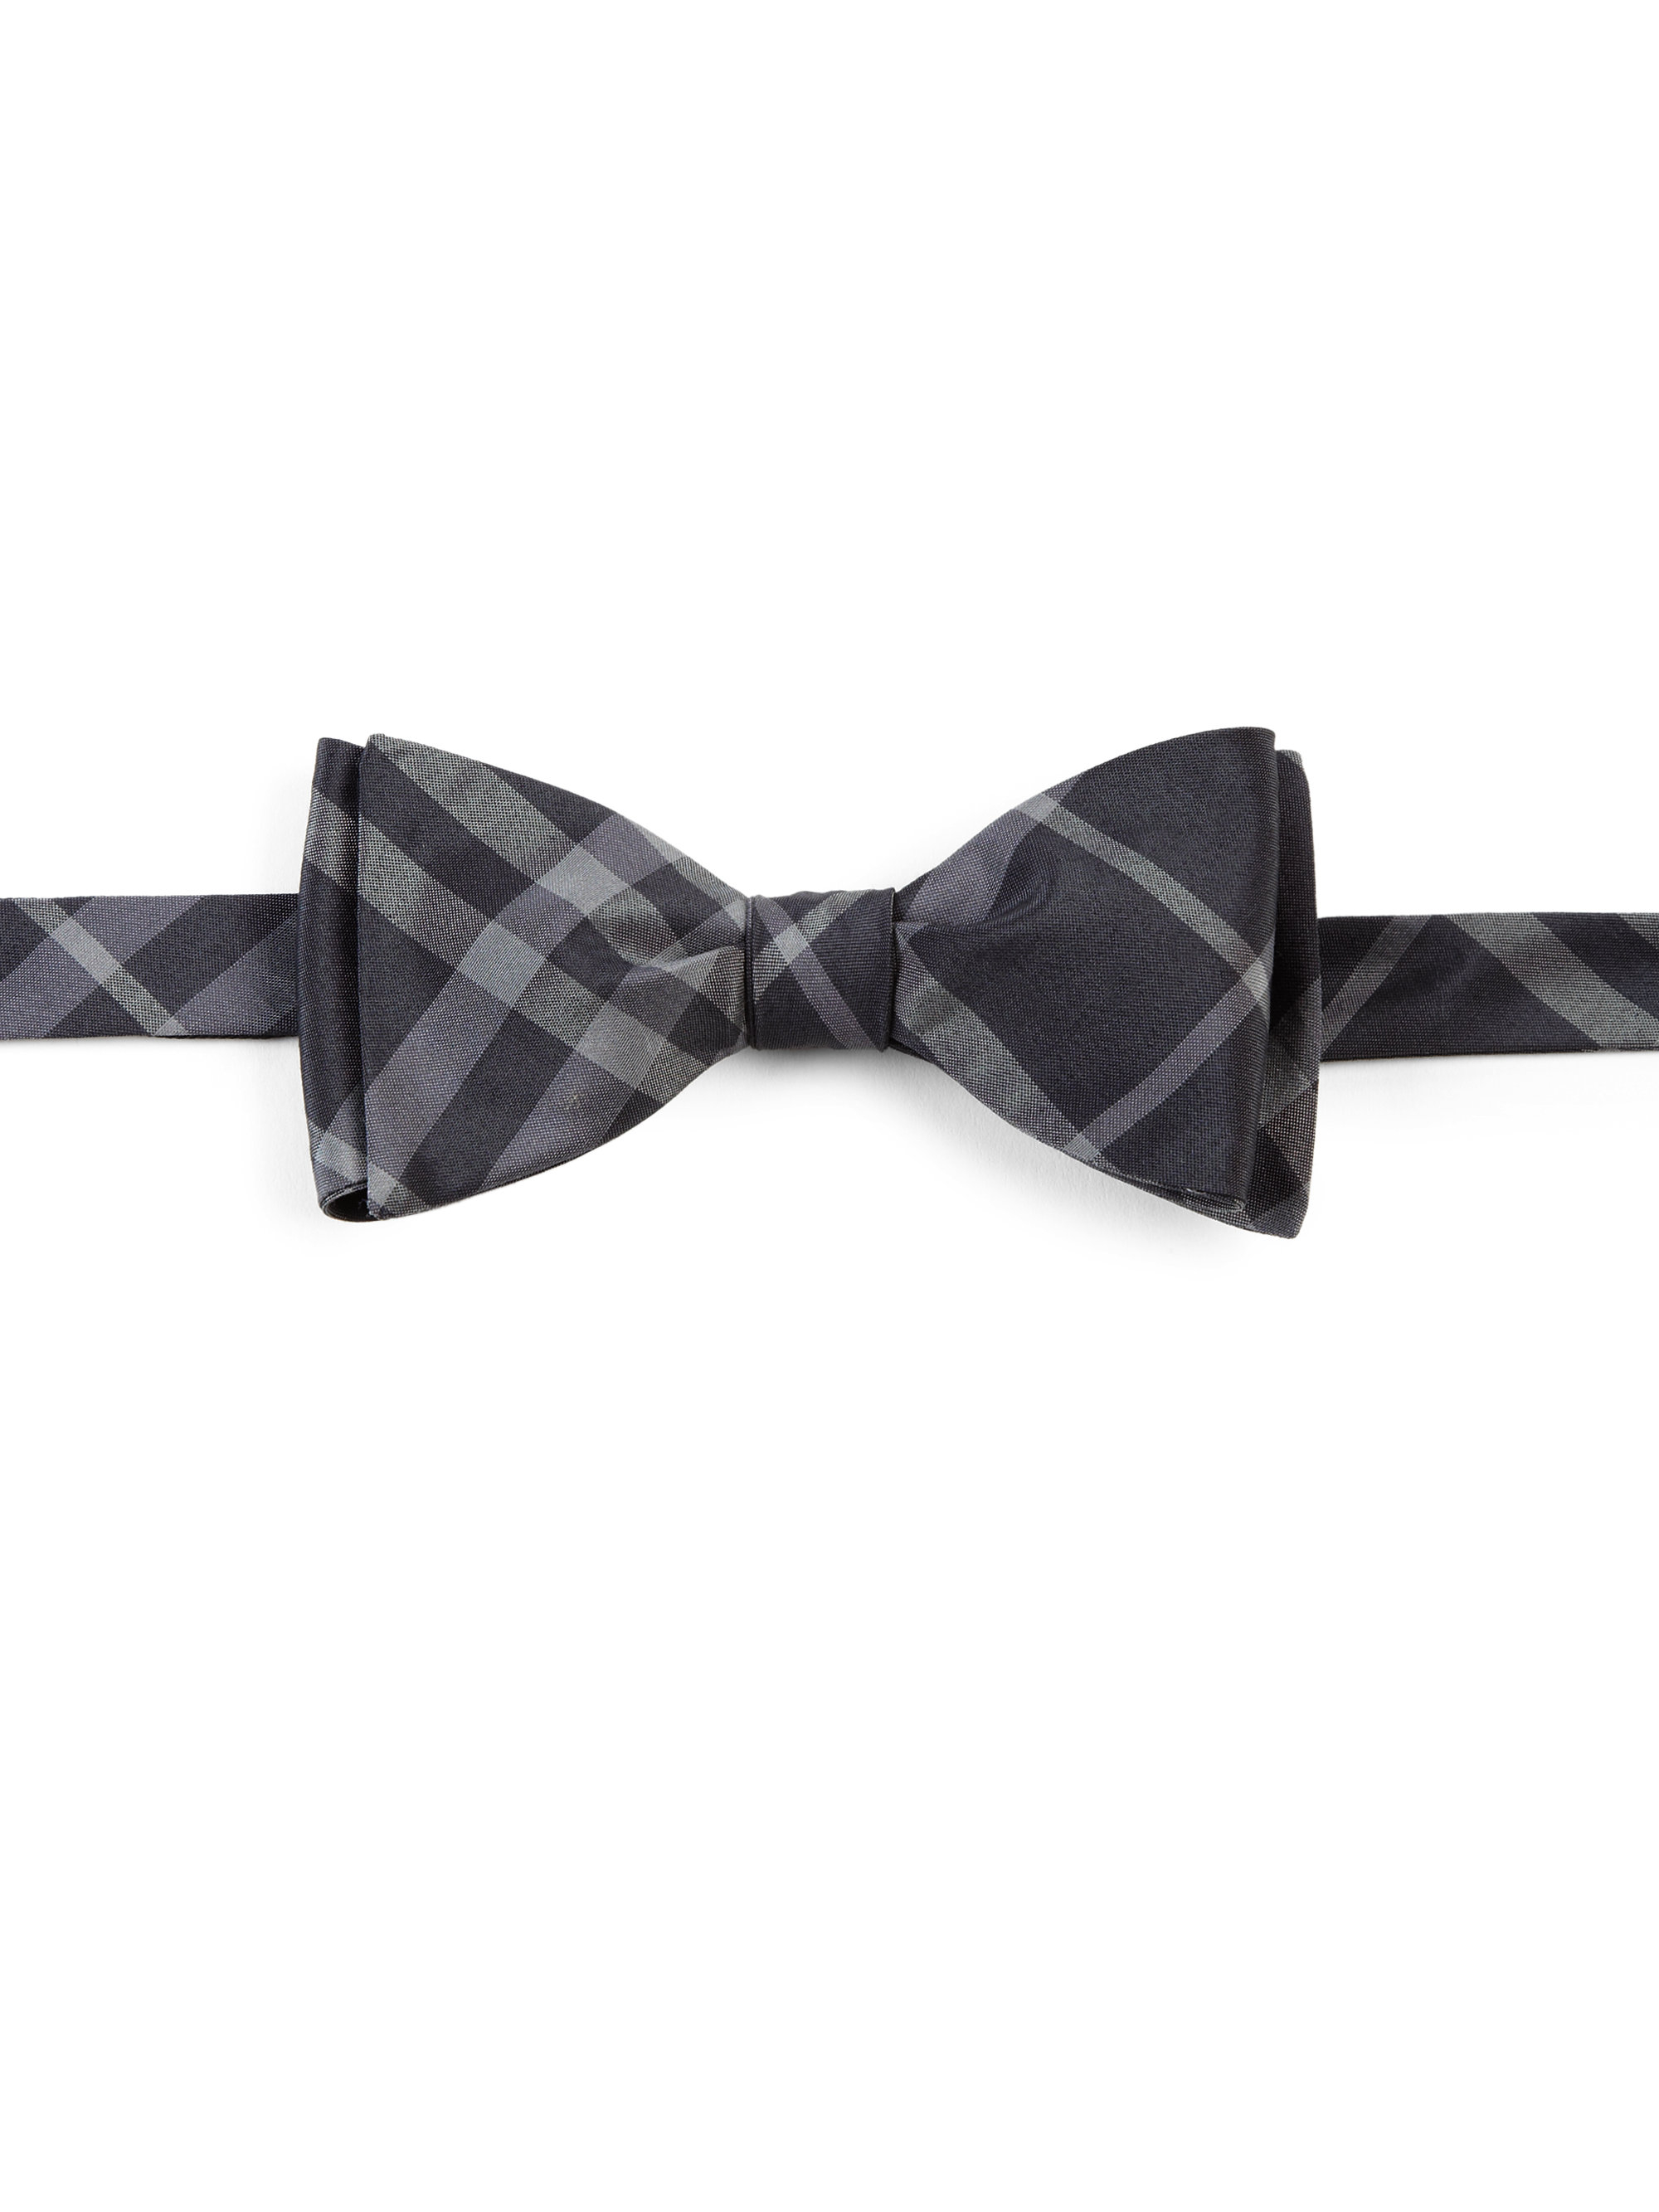 Burberry Blake Narrow Check Bow Tie in Charcoal (Black) for Men - Lyst